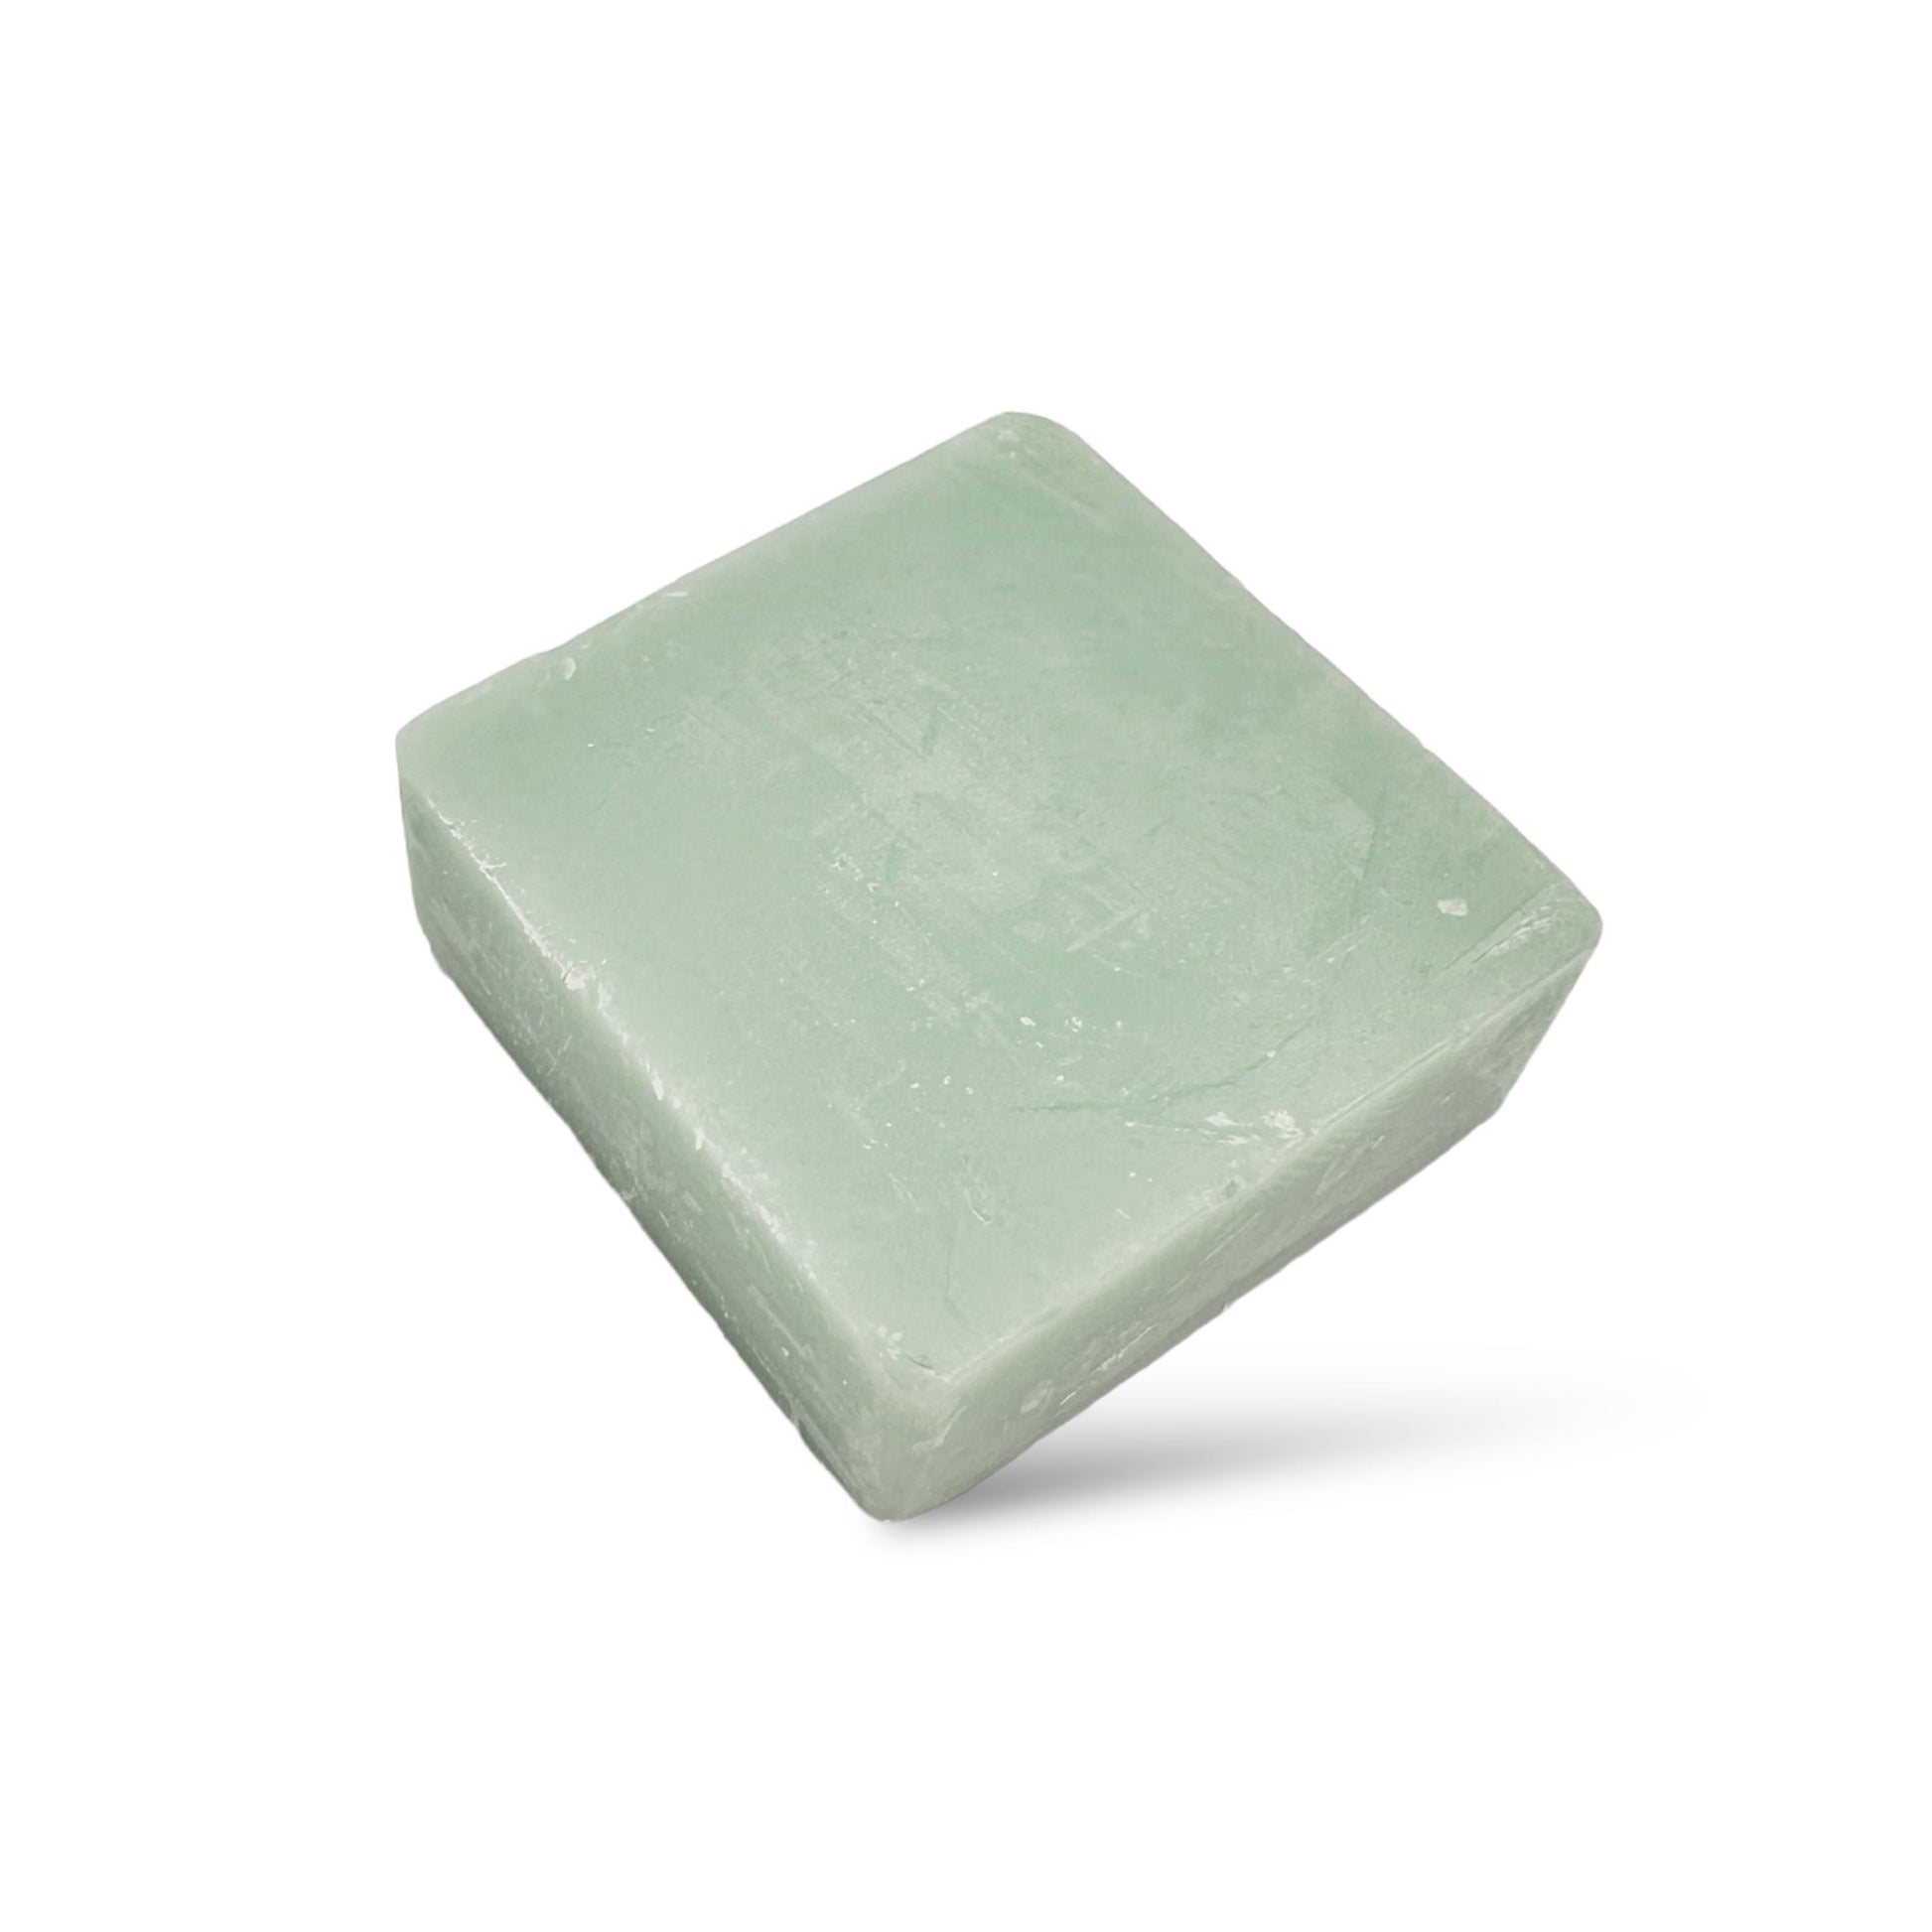 Wax Melt Cube - ScentWick Candles